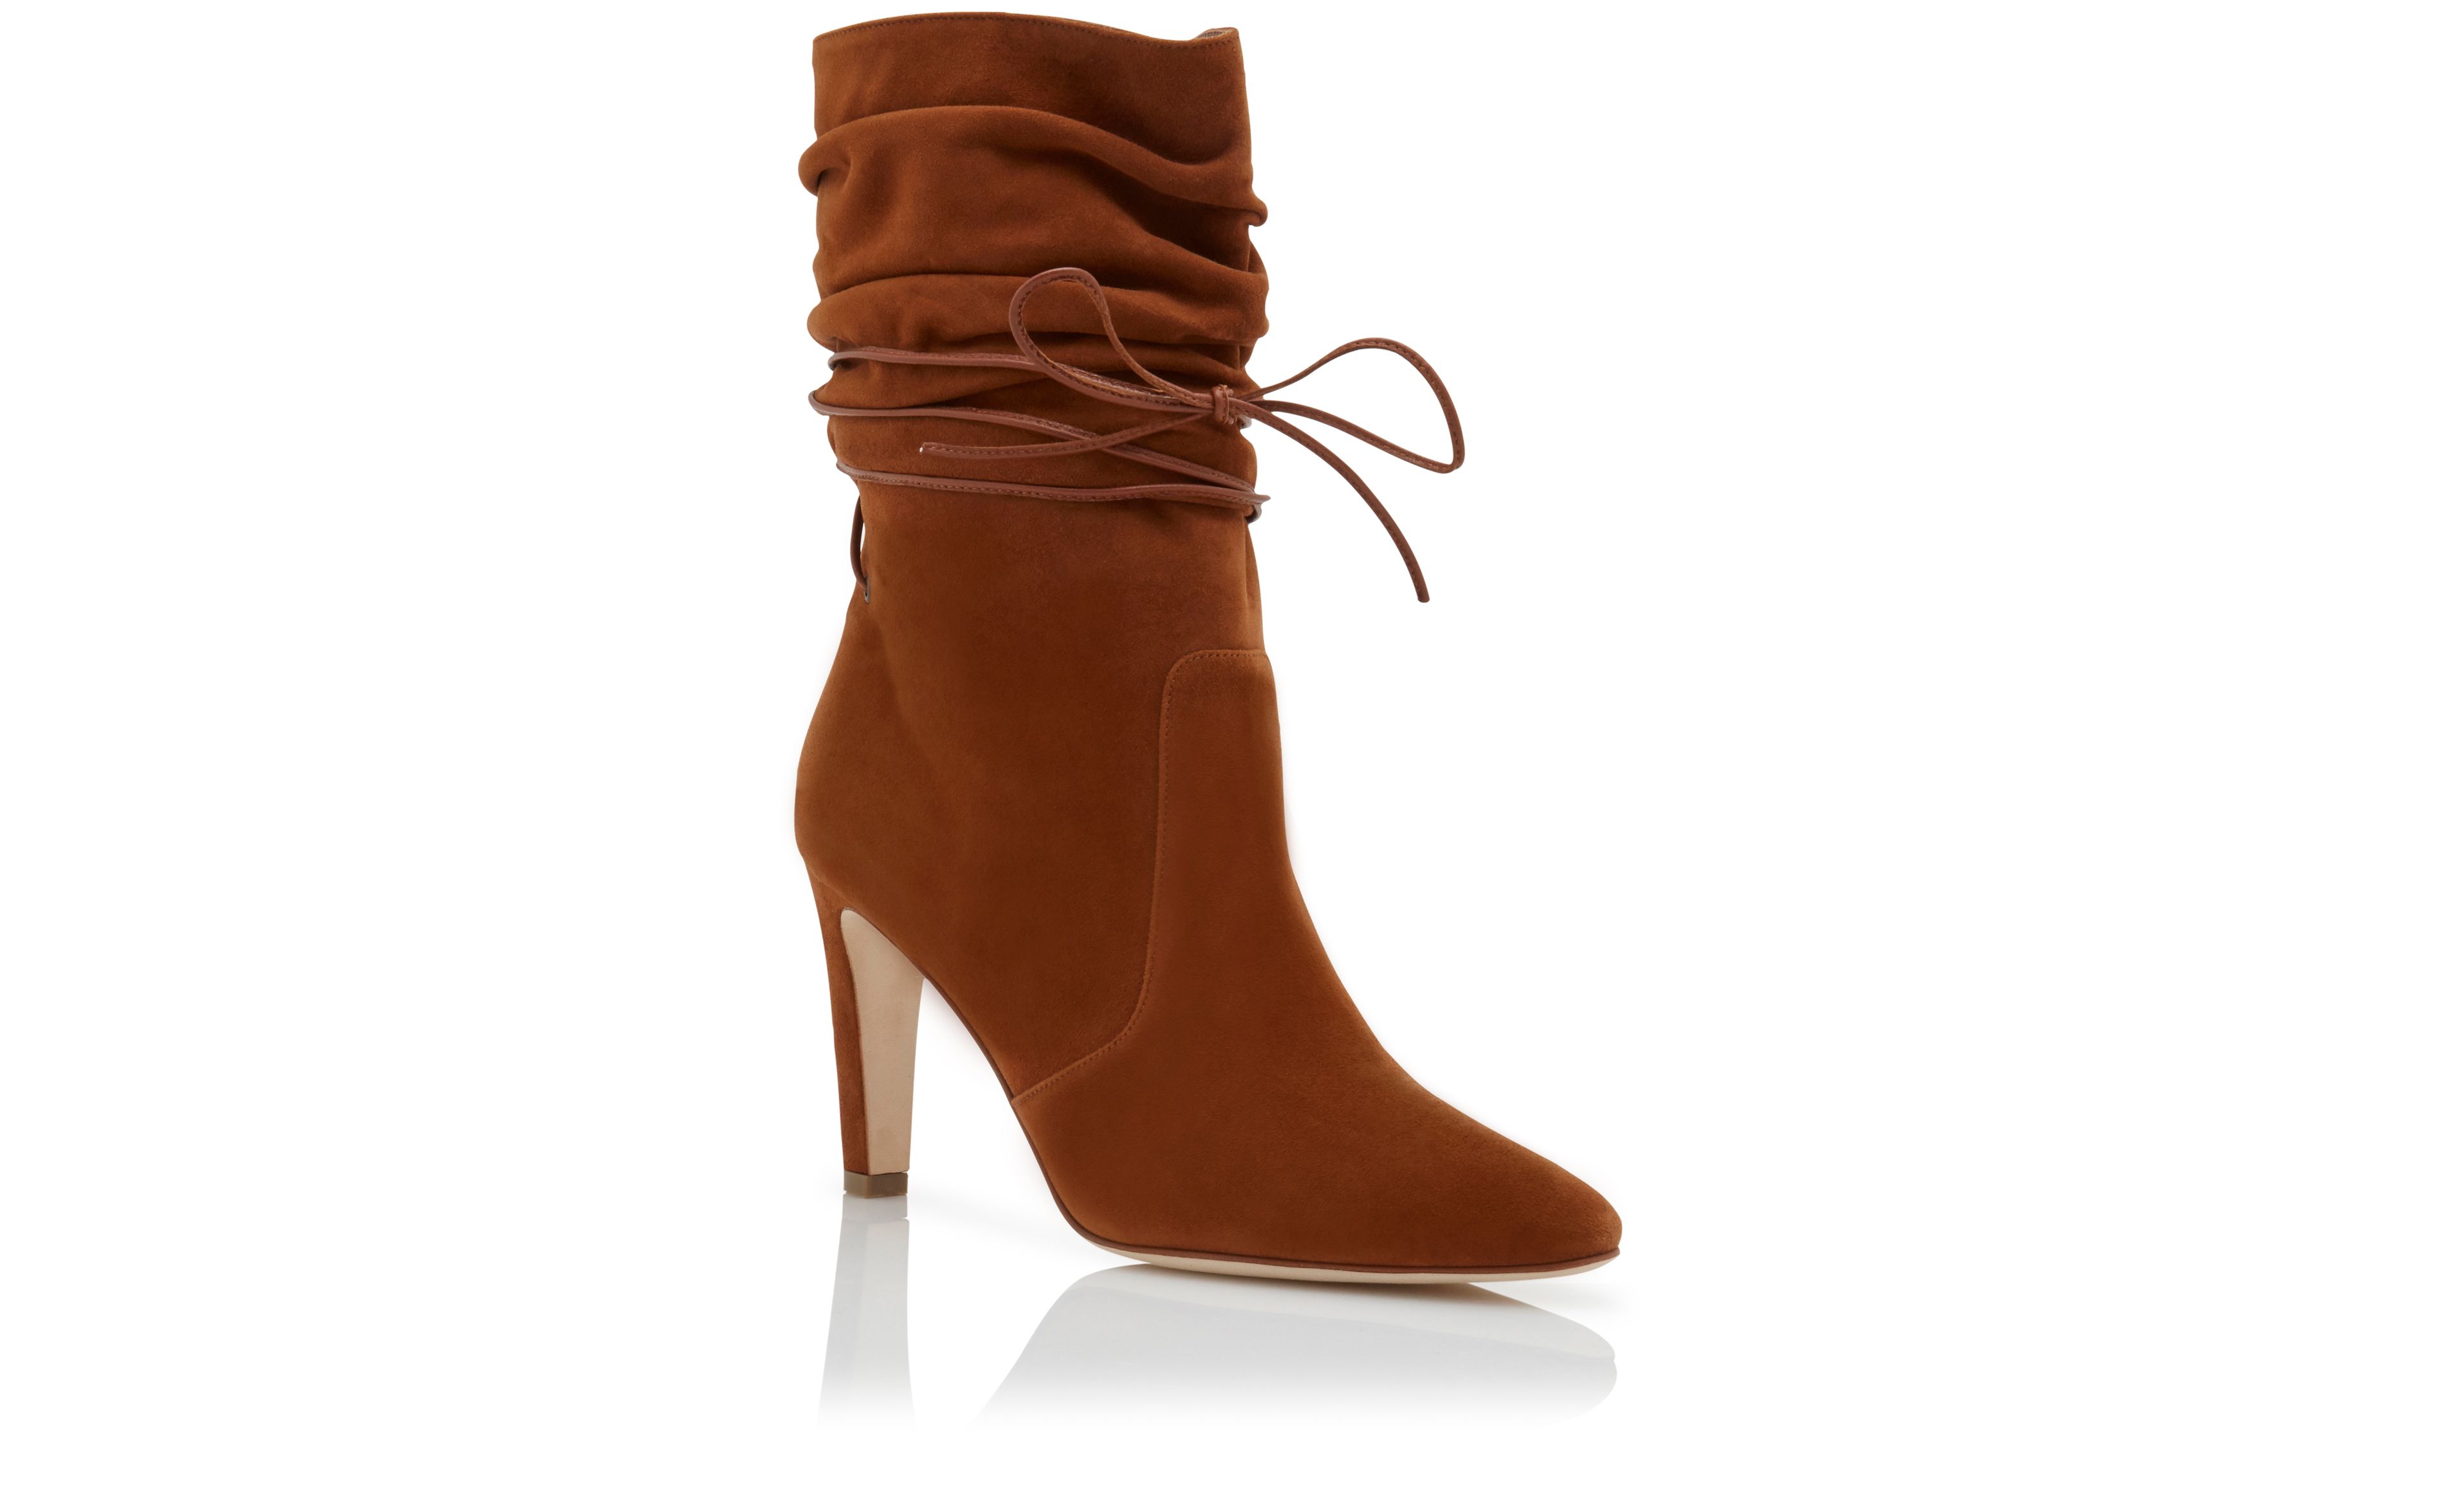 Designer Brown Suede Slouchy Ankle Boots - Image Upsell